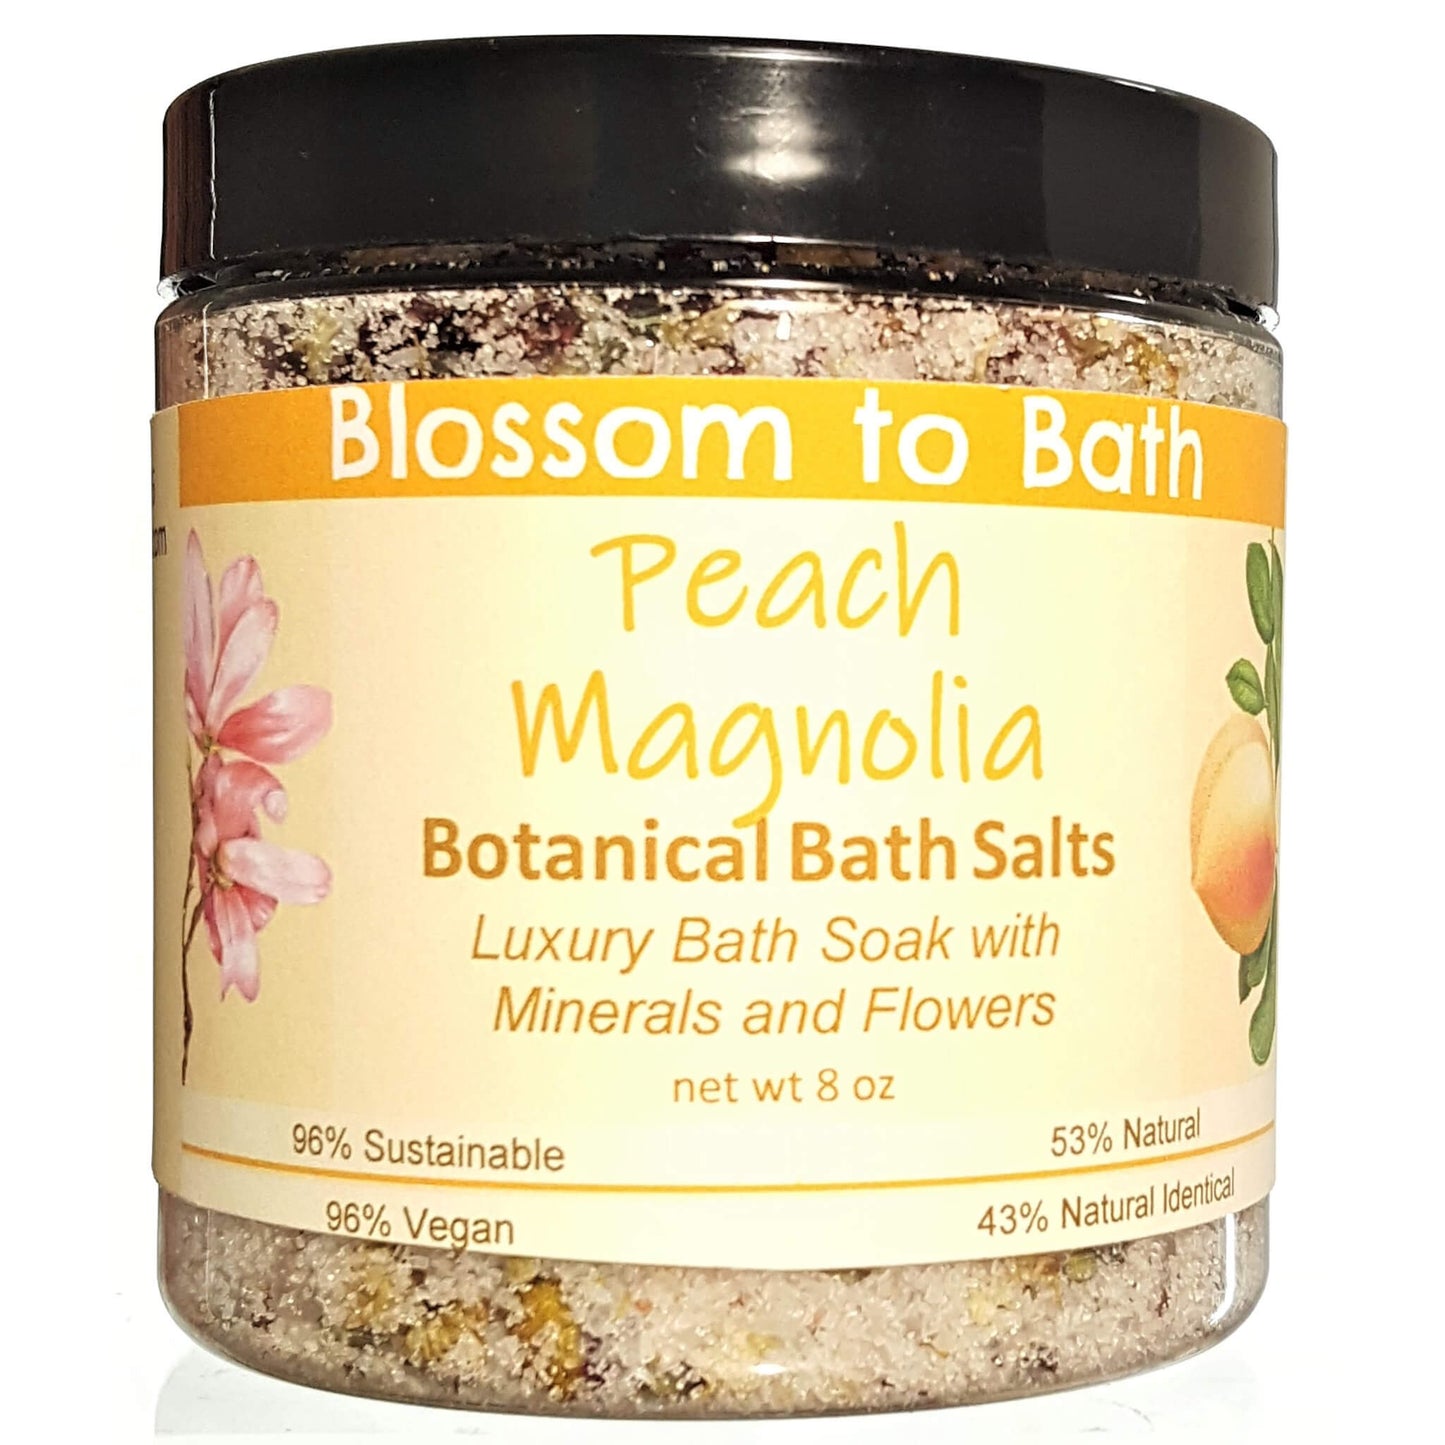 Buy Blossom to Bath Peach Magnolia Botanical Bath Salts from Flowersong Soap Studio.  A hand selected variety of skin loving botanicals and mineral rich salts for a unique, luxurious soaking experience  An intoxicating blend of peach, magnolia, and raspberry.